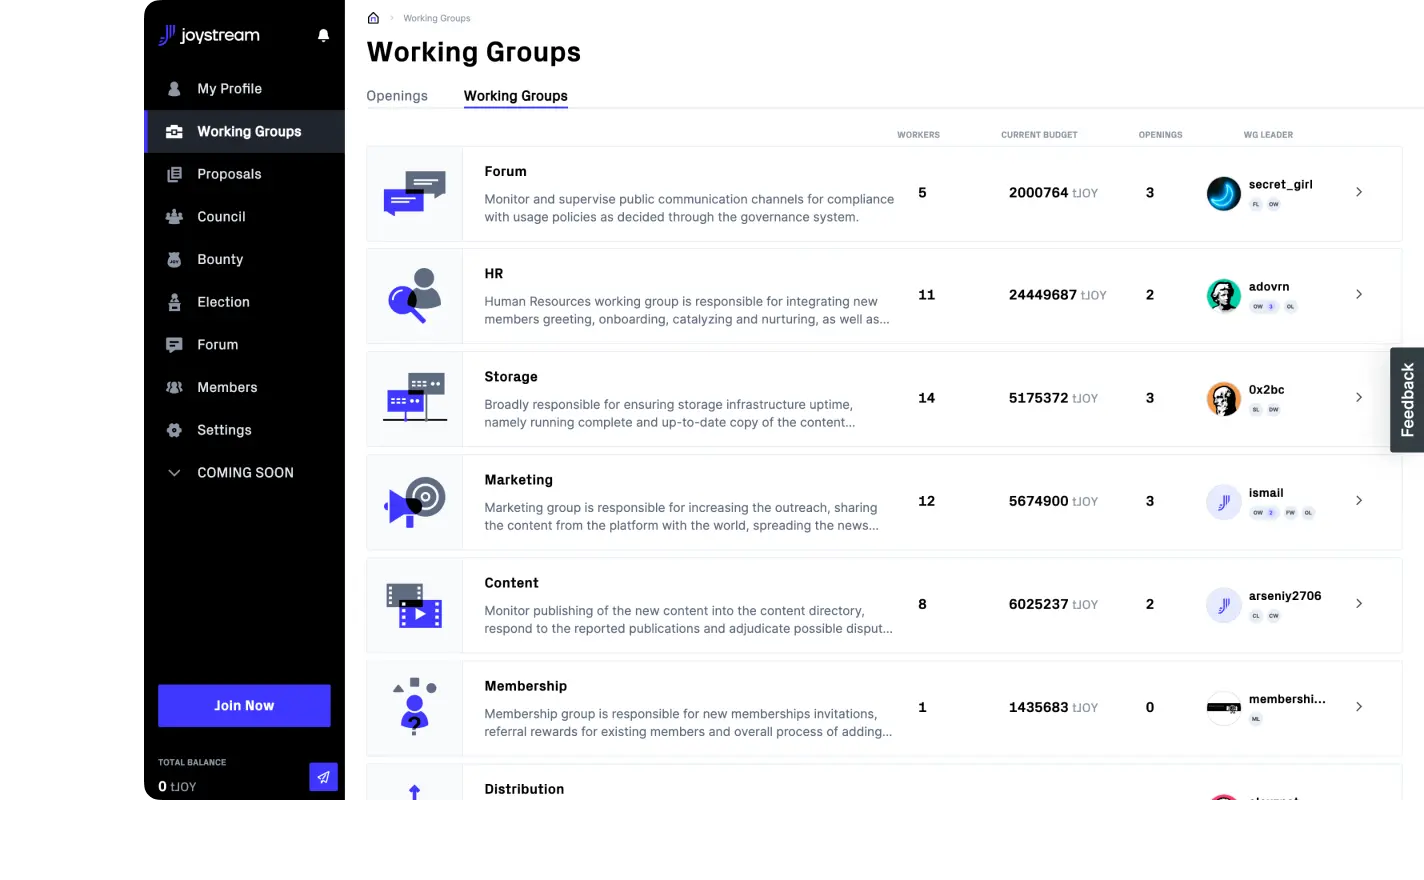 joystream governance product, open on tab working groups, outlining the currently available groups